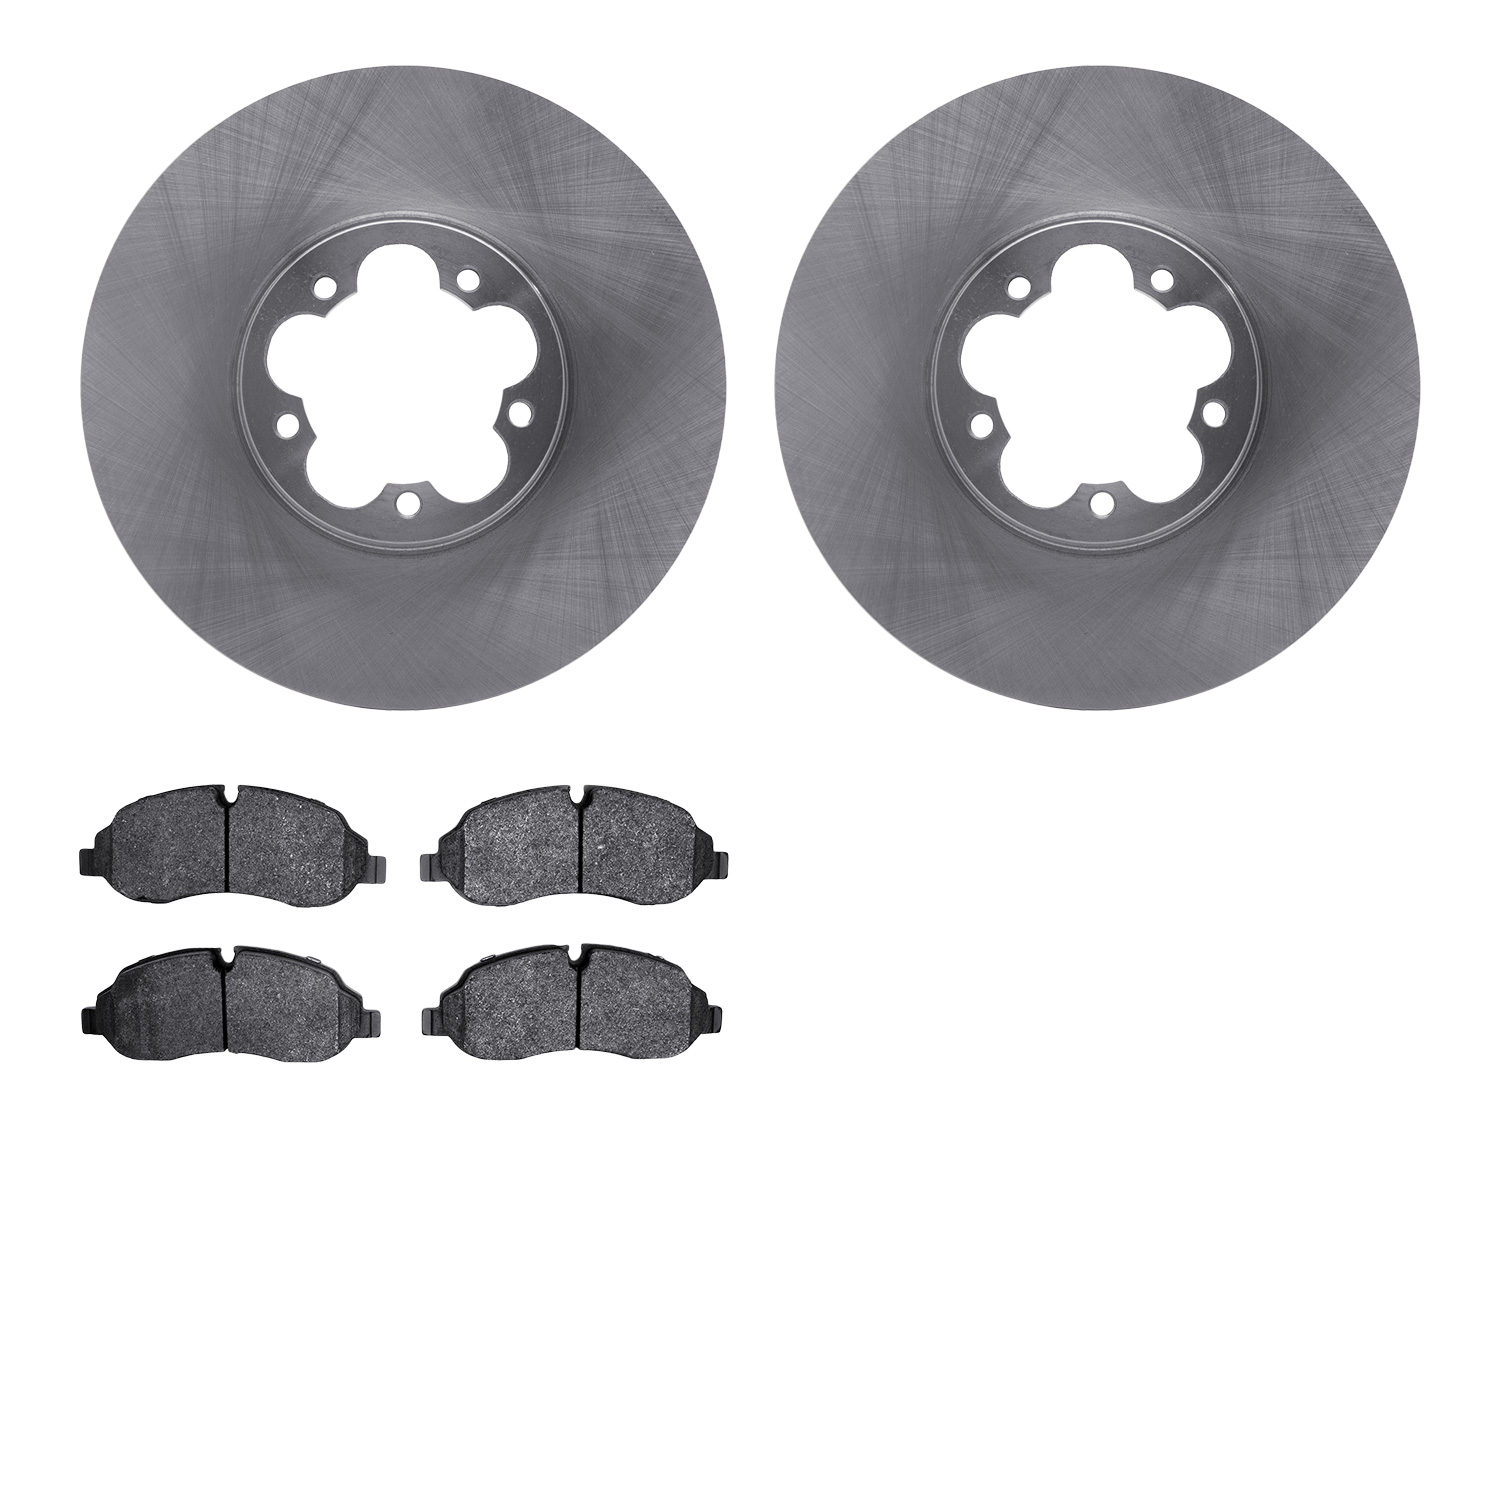 6202-99696 Brake Rotors w/Heavy-Duty Brake Pads Kit, Fits Select Ford/Lincoln/Mercury/Mazda, Position: Front